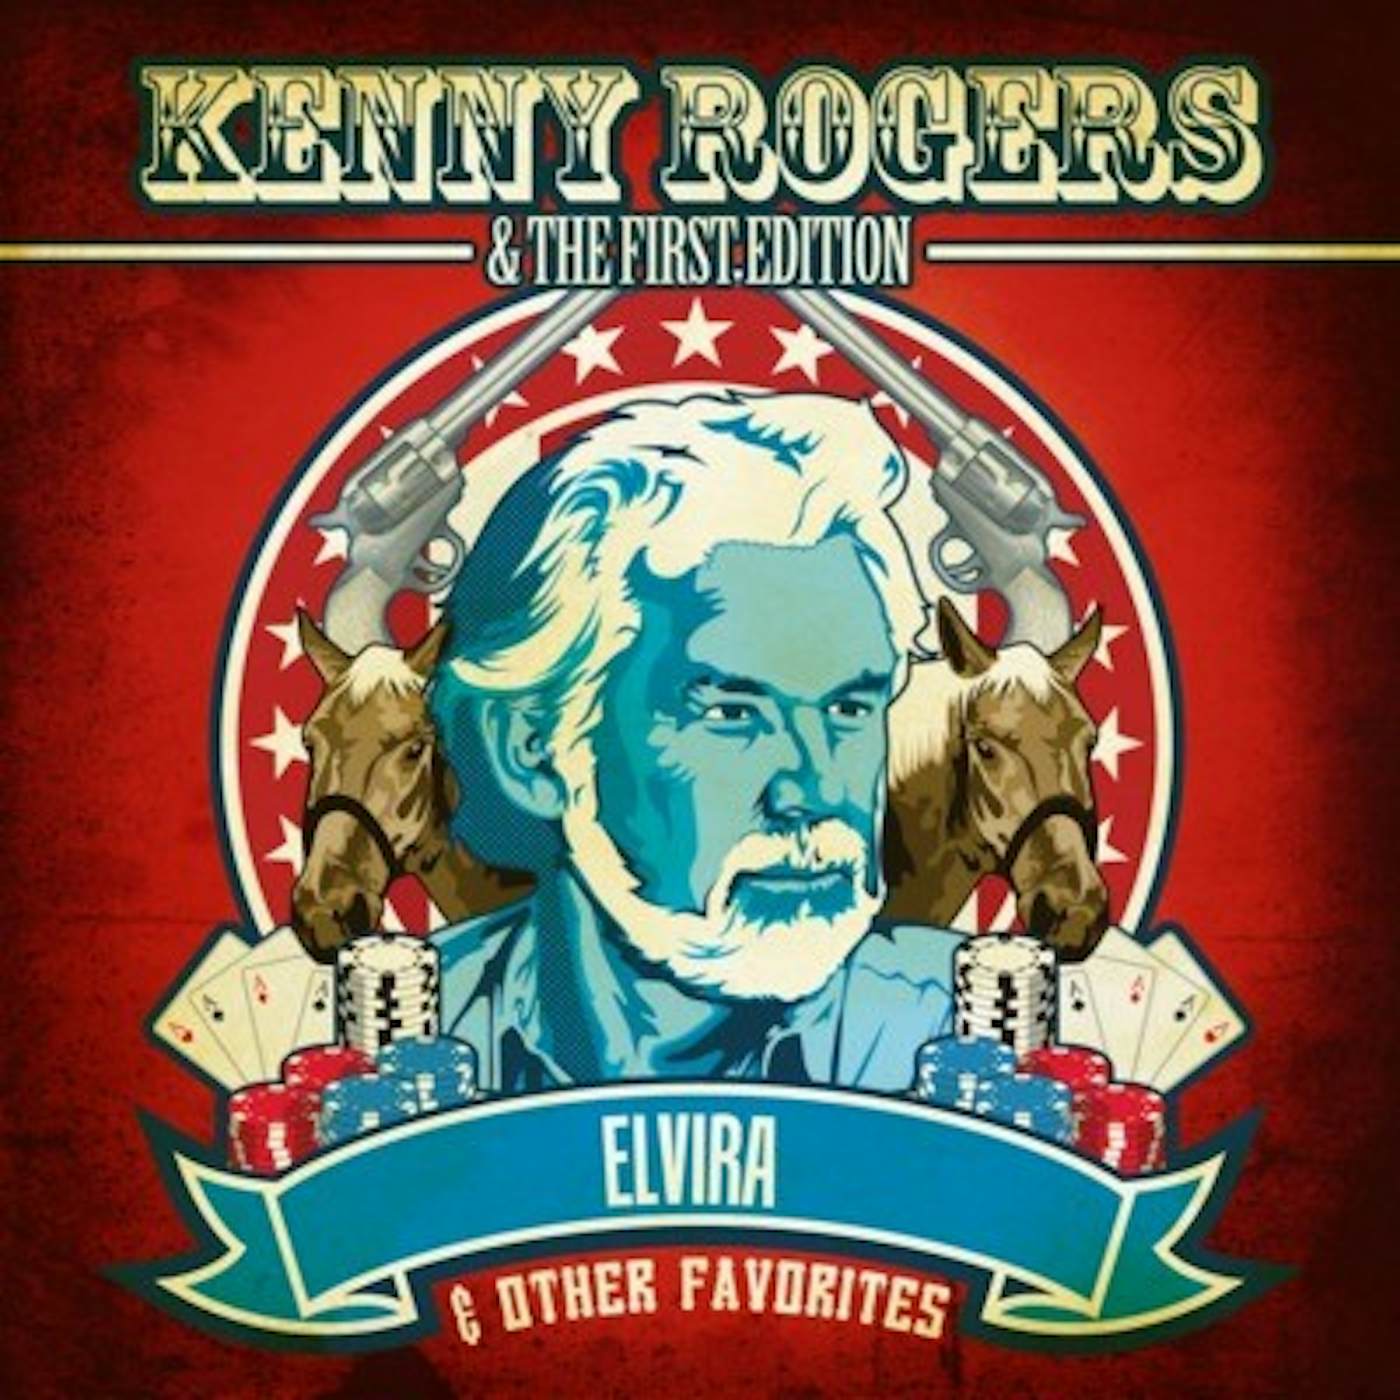 Kenny Rogers & The First Edition ELVIRA & OTHER FAVORITES CD